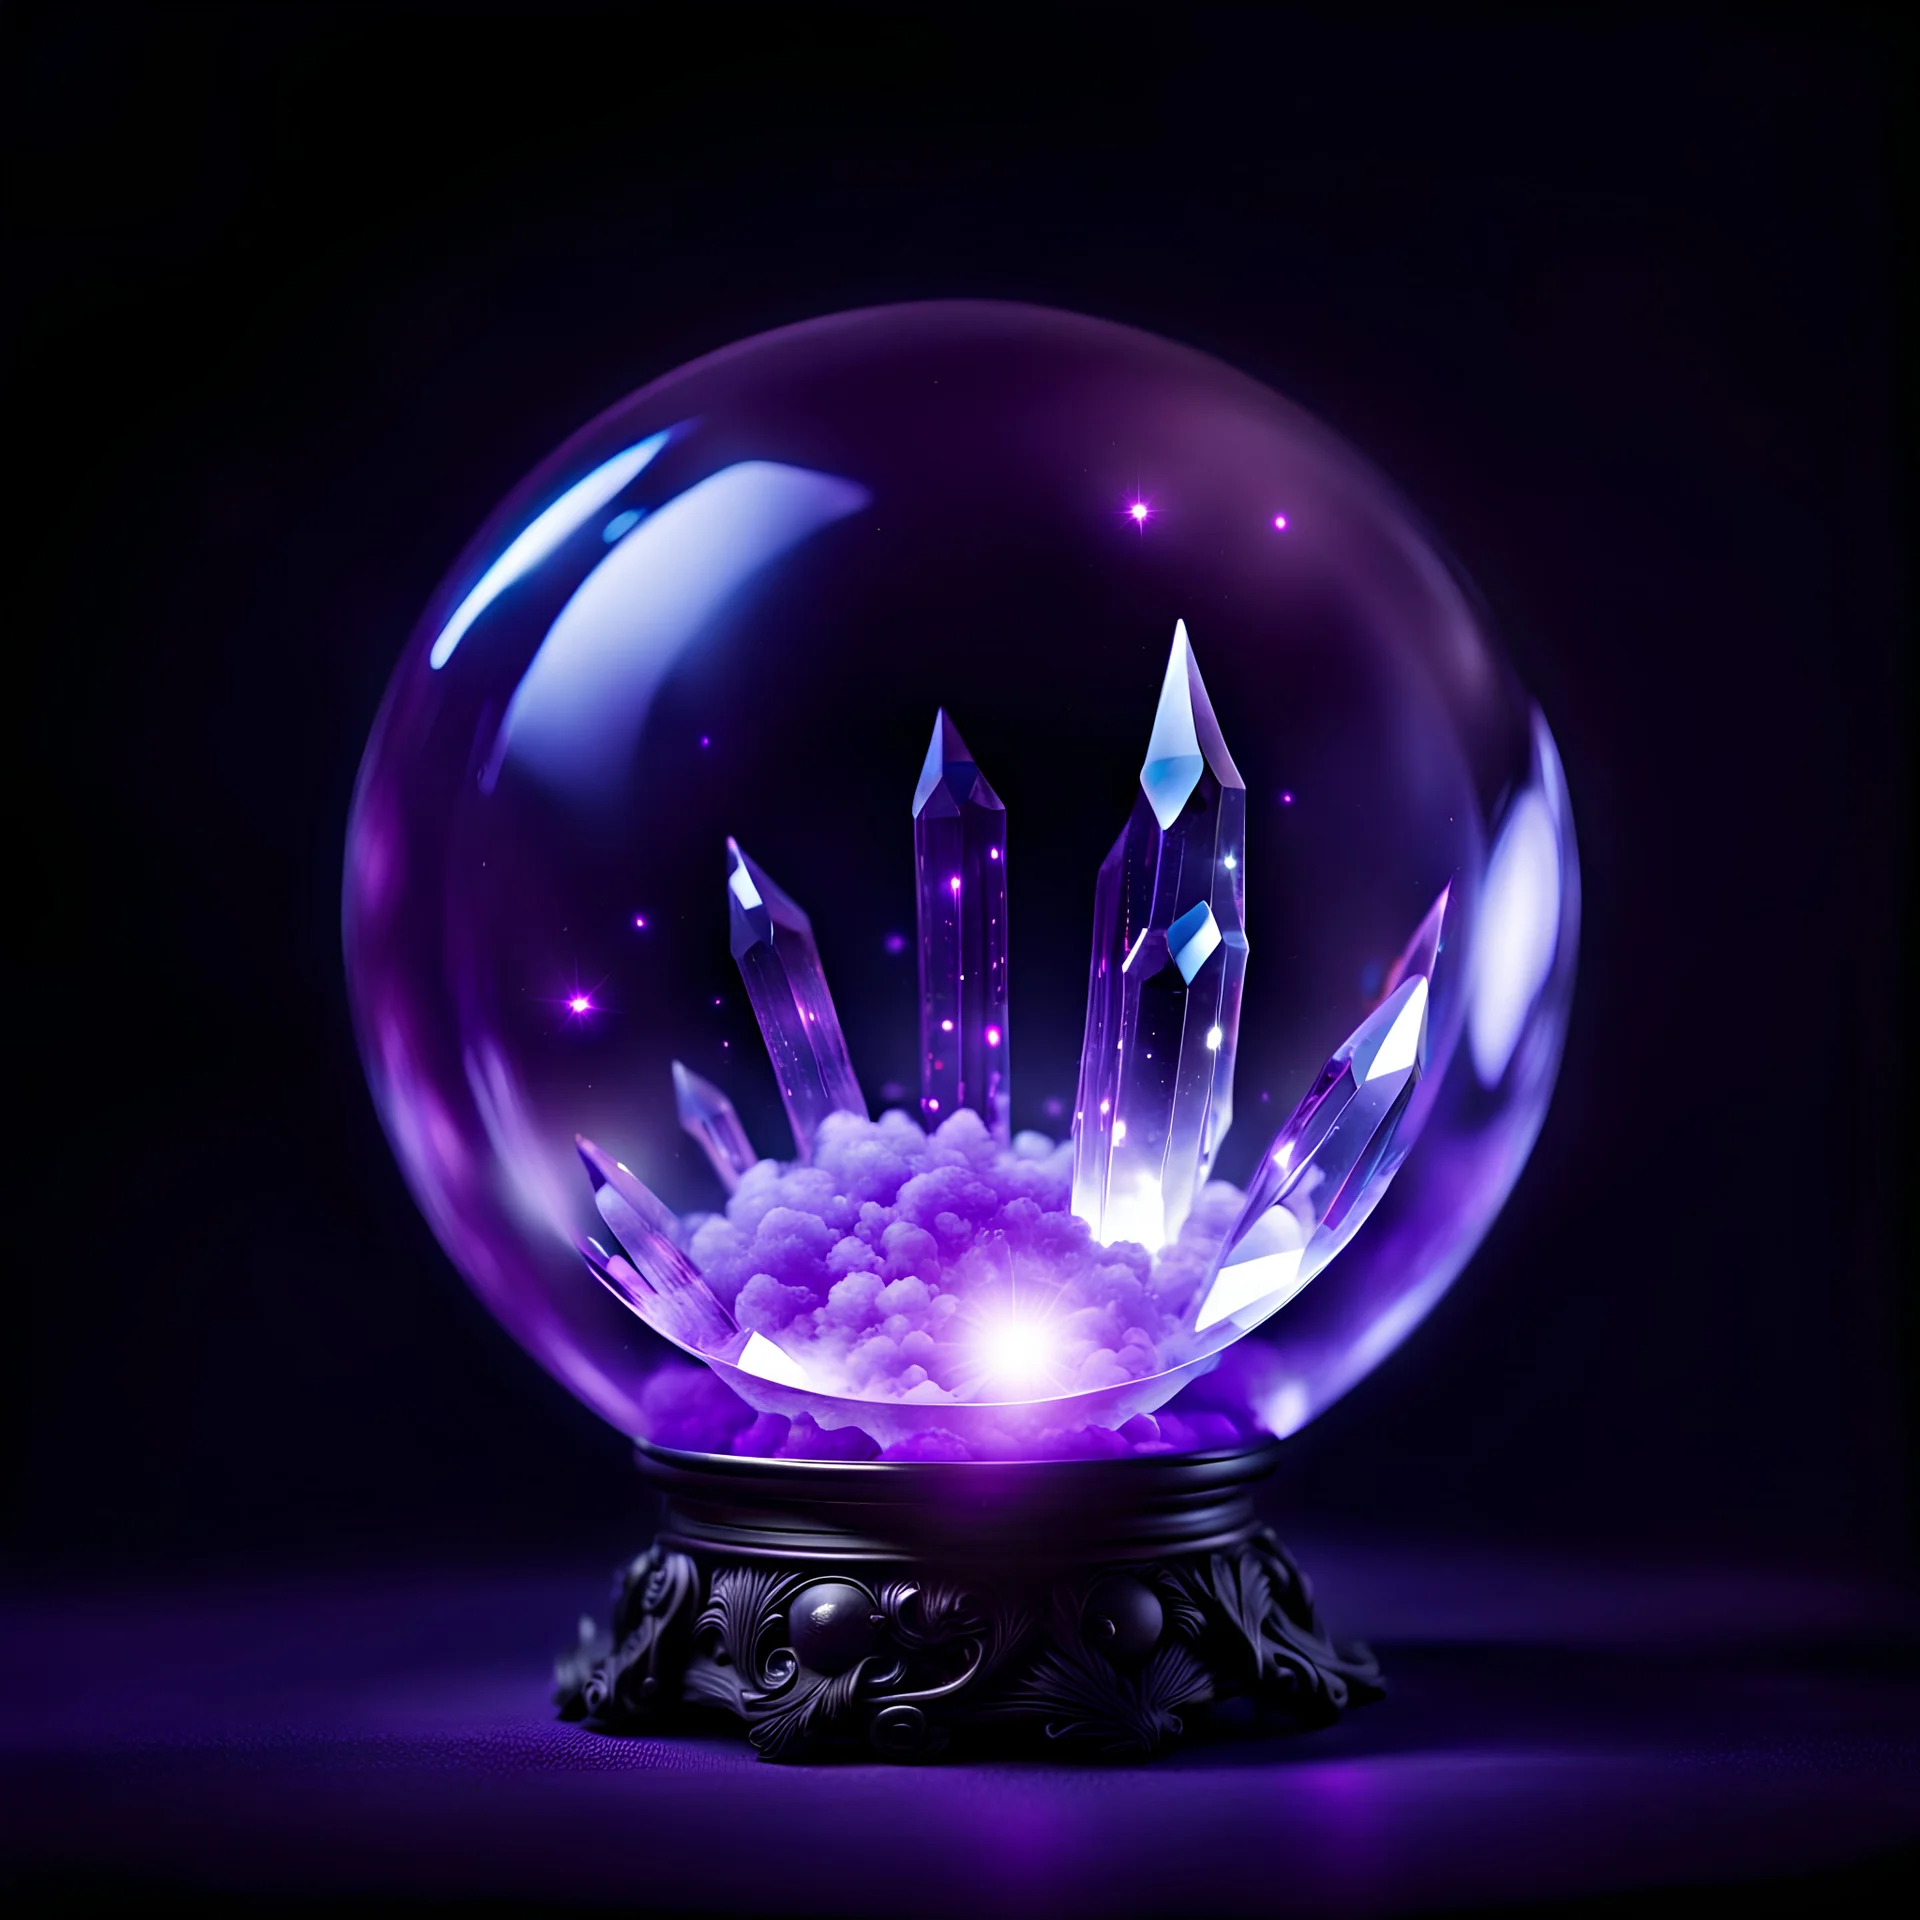 crystal ball as a magical weapon, purple lighting, black background